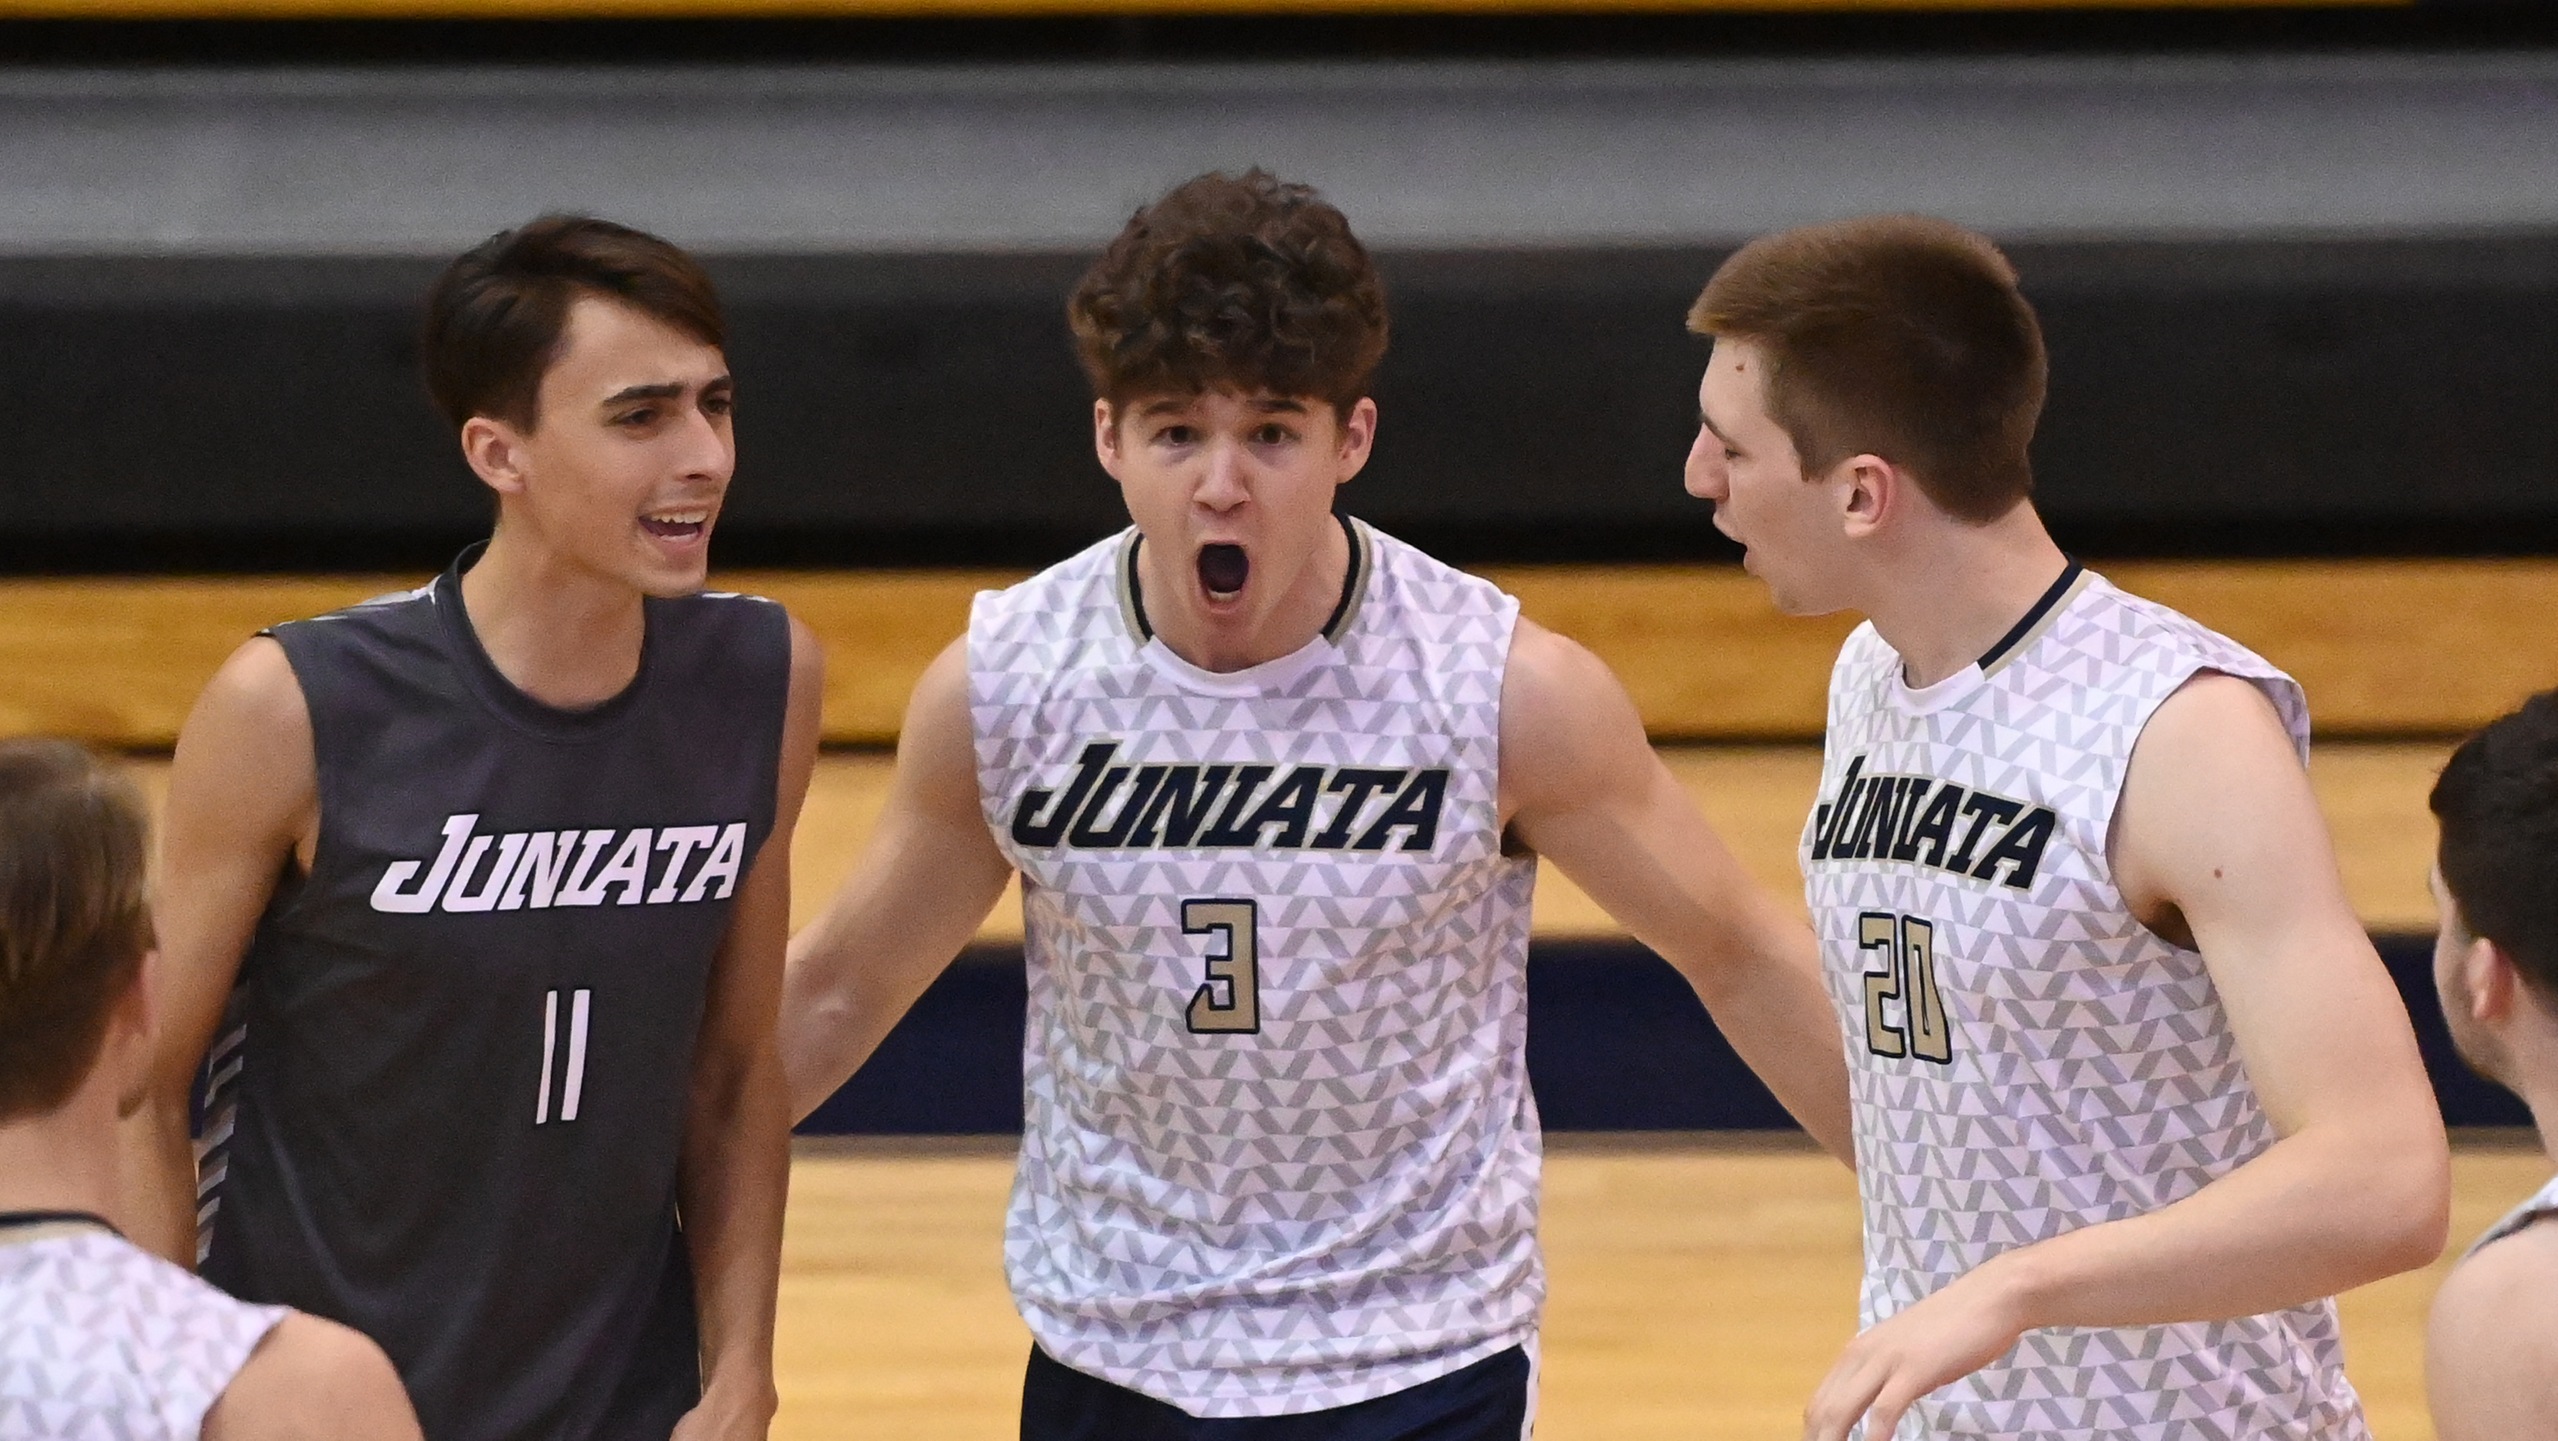 Men's Volleyball Sweeps #12 Saints and Mighty Macs, Take Sole Possession of Third Place in CVC